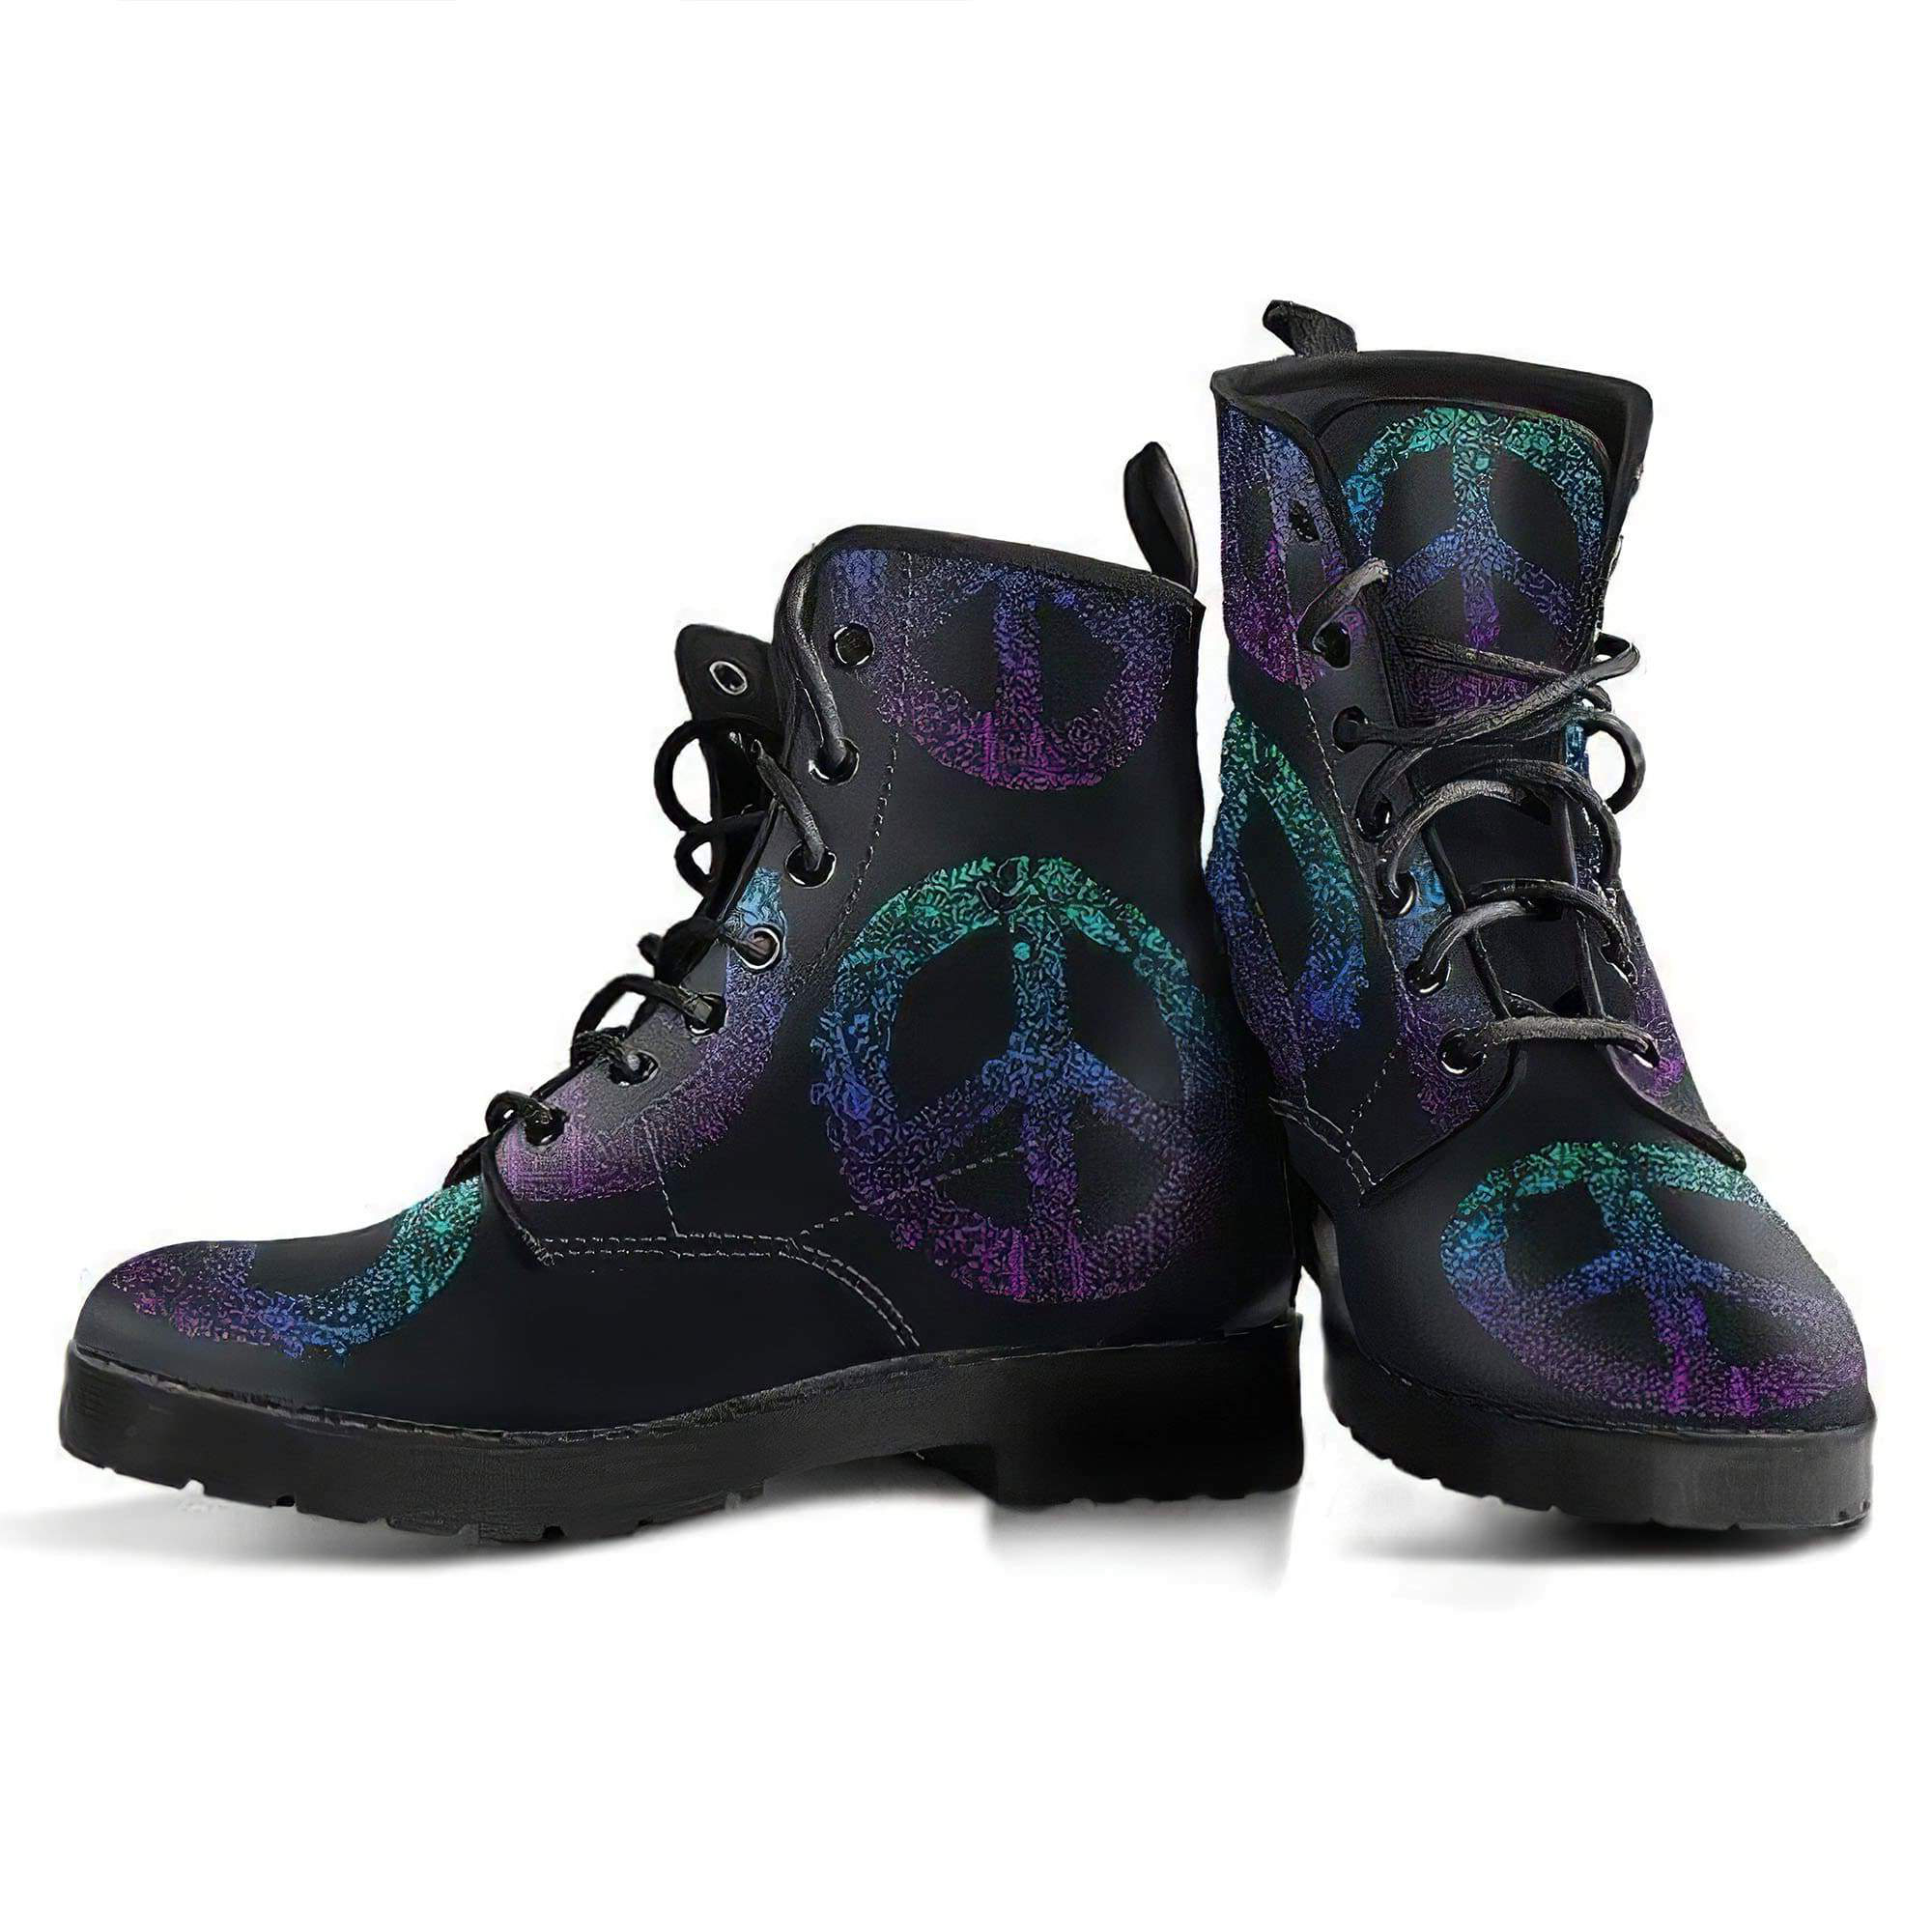 purple-peace-handcrafted-boots-women-s-leather-boots-12051939164221.jpg